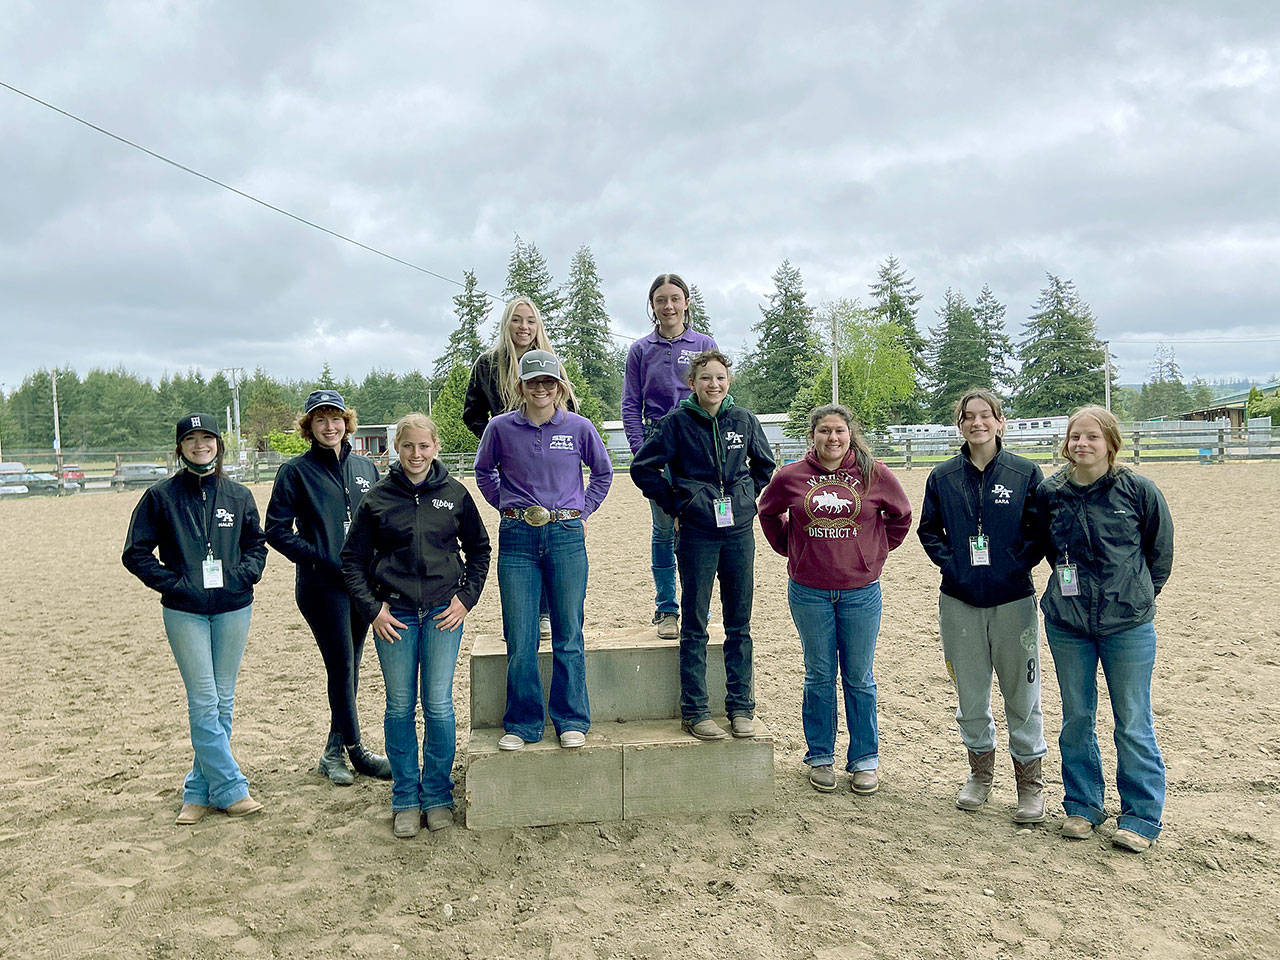 Sequim and Port Angeles high school equestrian teams take a break at the Washington High School Equestrian Team District 4’s third and final meet in Elma before state finals. They are bottom row, from left, Haley Bishop (PA), Katie Marchant (PA), Libby Swanberg (S), Keri Tucker (S), Sydney Hutton (PA), Abby Garcia (S), Sara Holland (PA) and Amelia Kinney (PA); top row, from left, Susannah Sharp (S) and Rainey Bronsink (S). (Photo courtesy of Katie Newton)